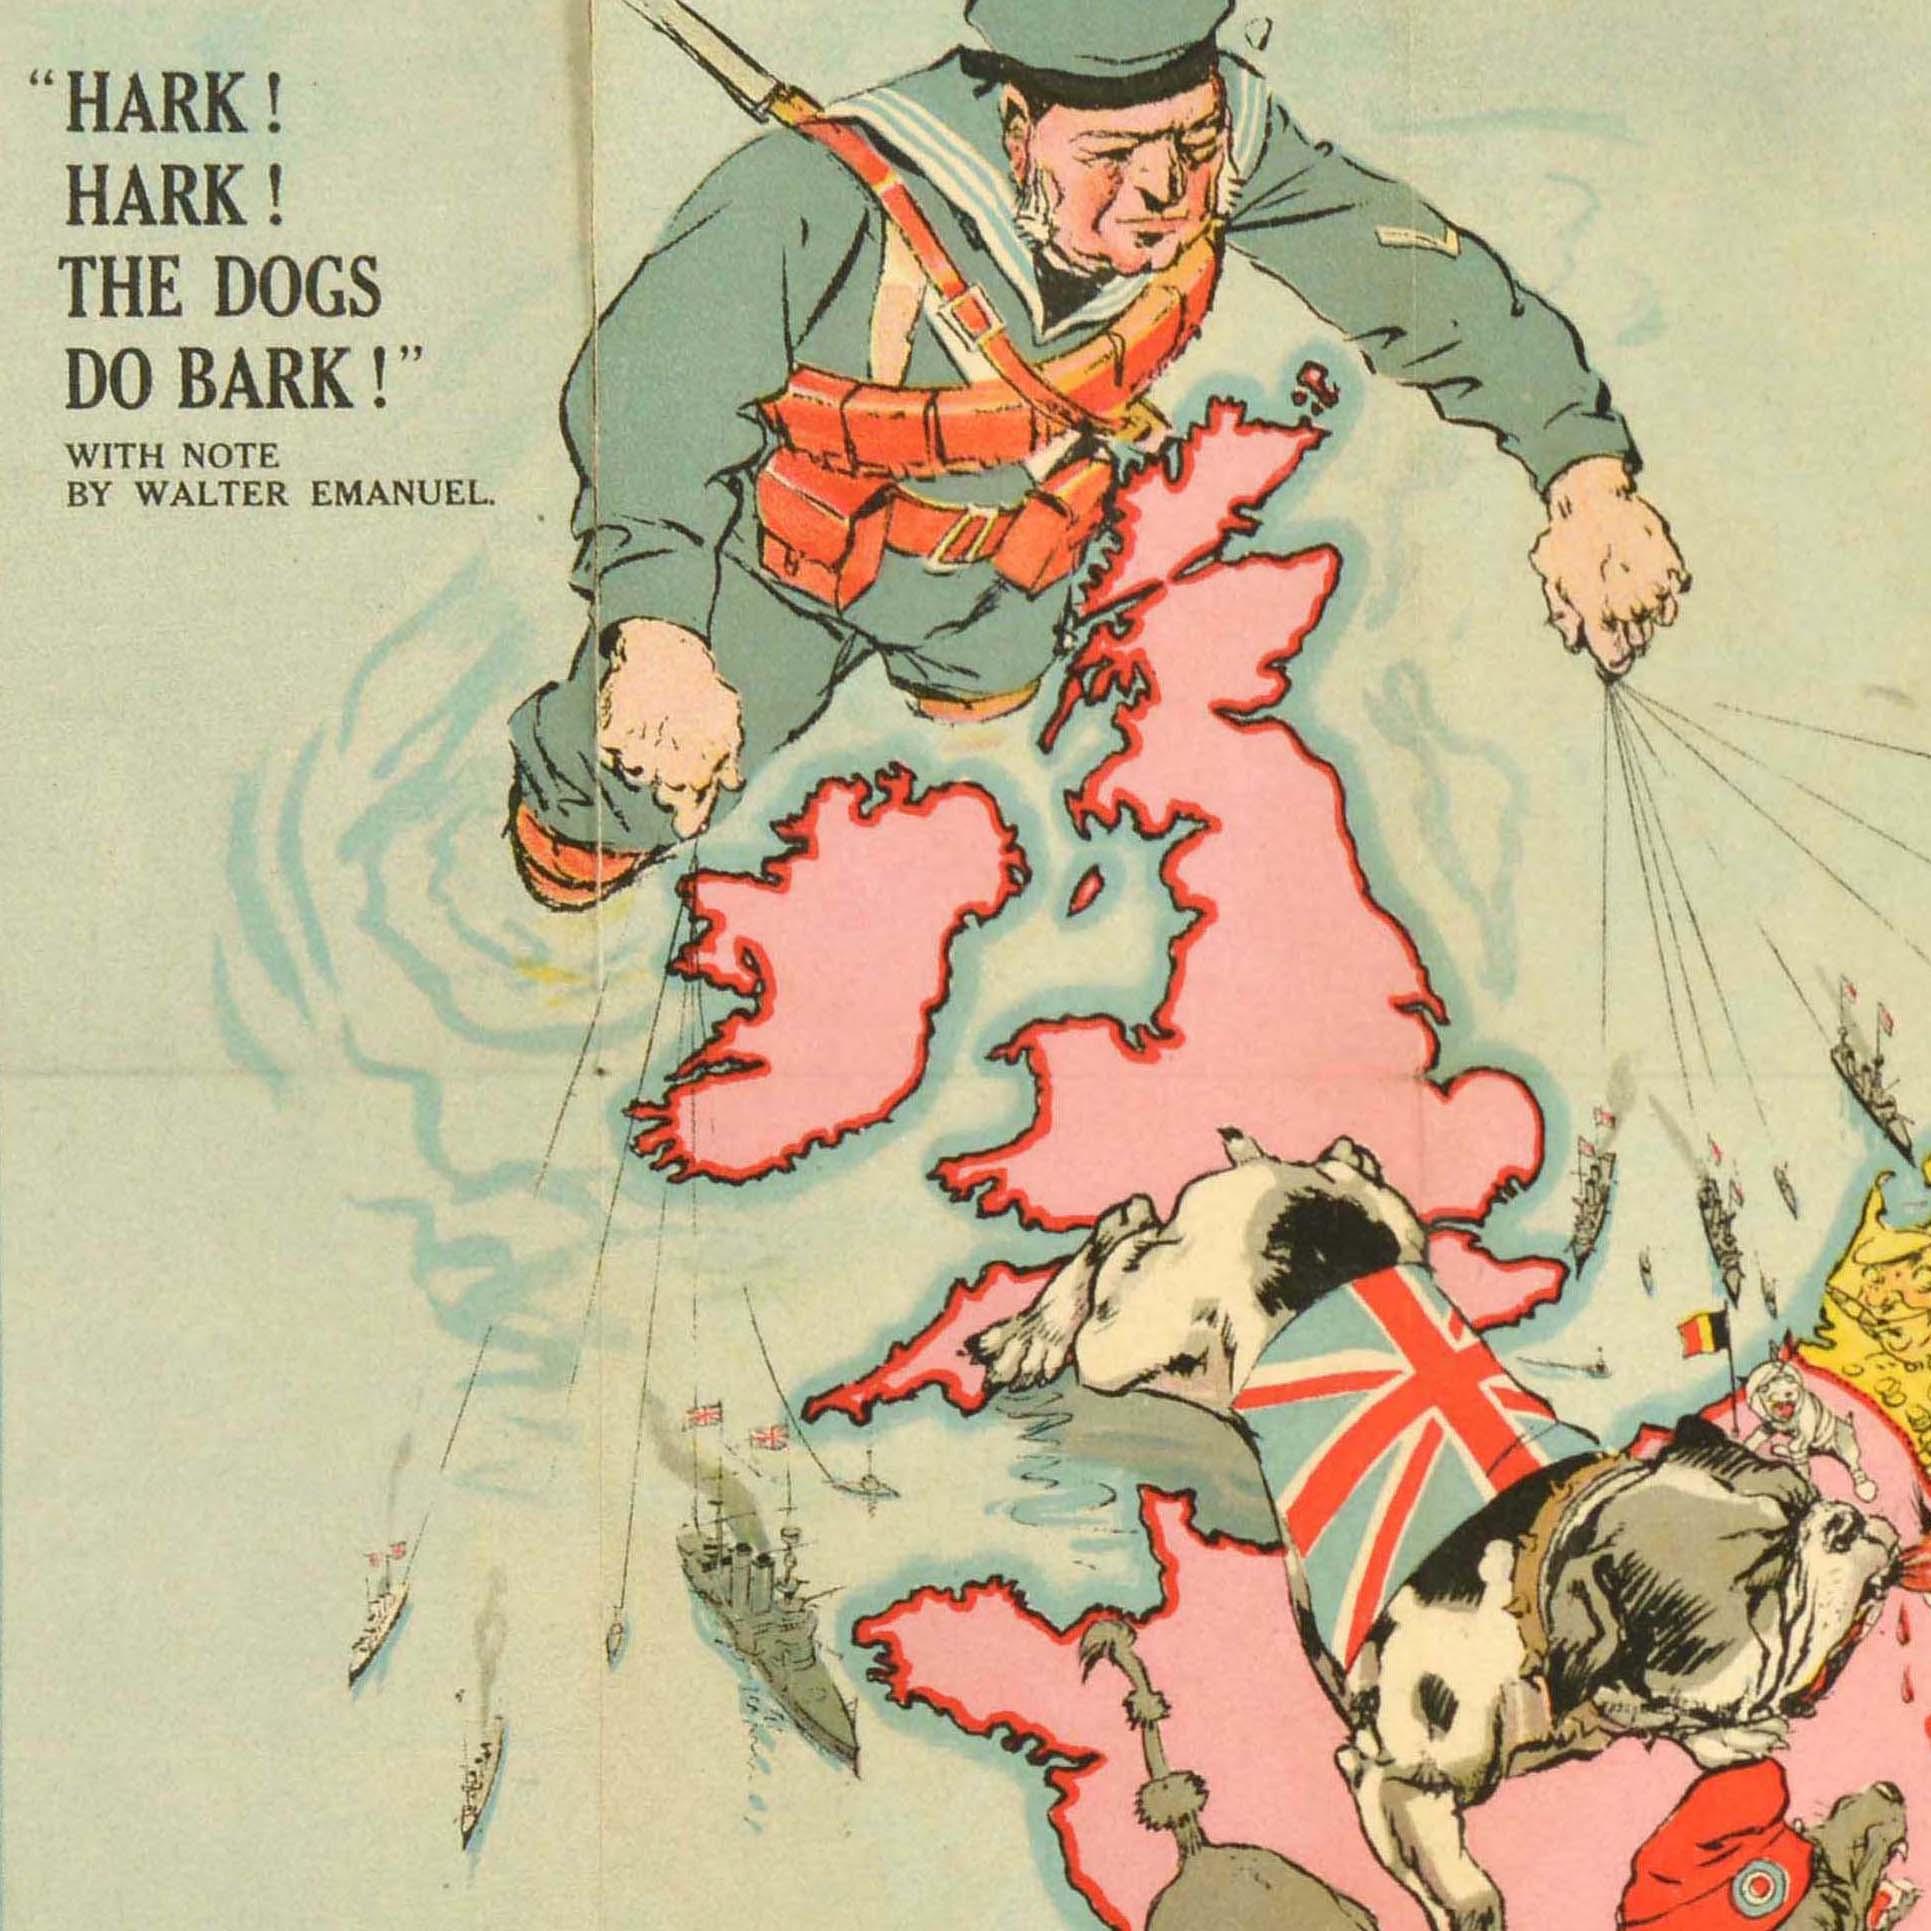 Original Antique World War One poster - Hark! Hark! The dogs do bark! With note by Walter Emanuel - featuring a serio-comic map of Europe at war with military soldier caricature portraits and some countries represented by dogs with Russia as a bear,